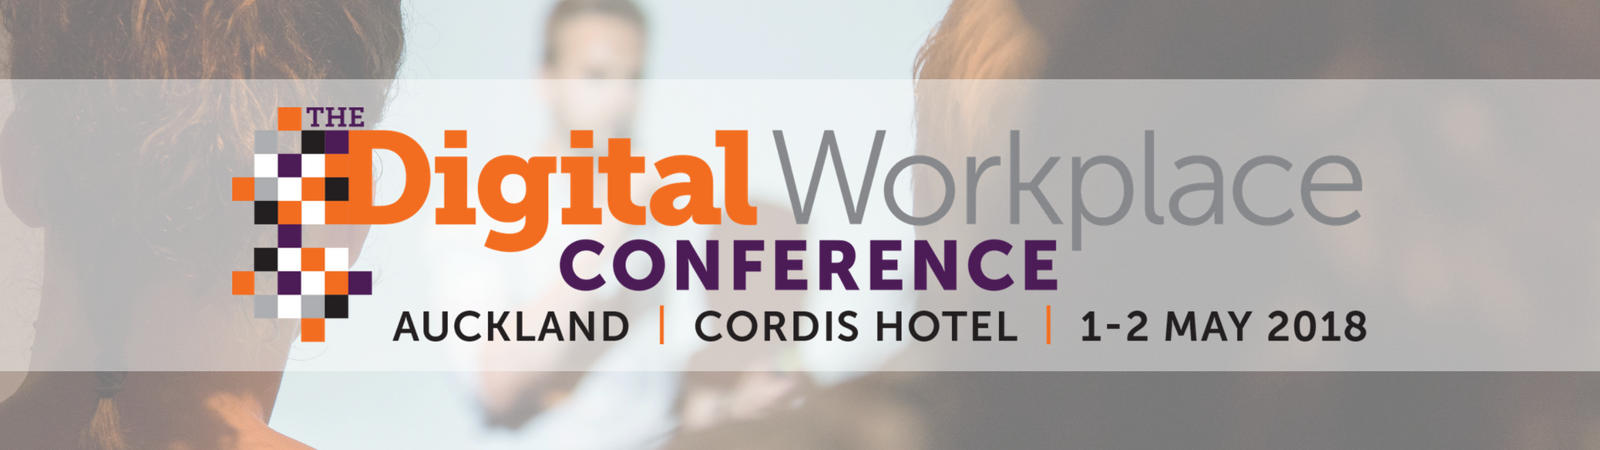 The Digital Workplace Conference NZ